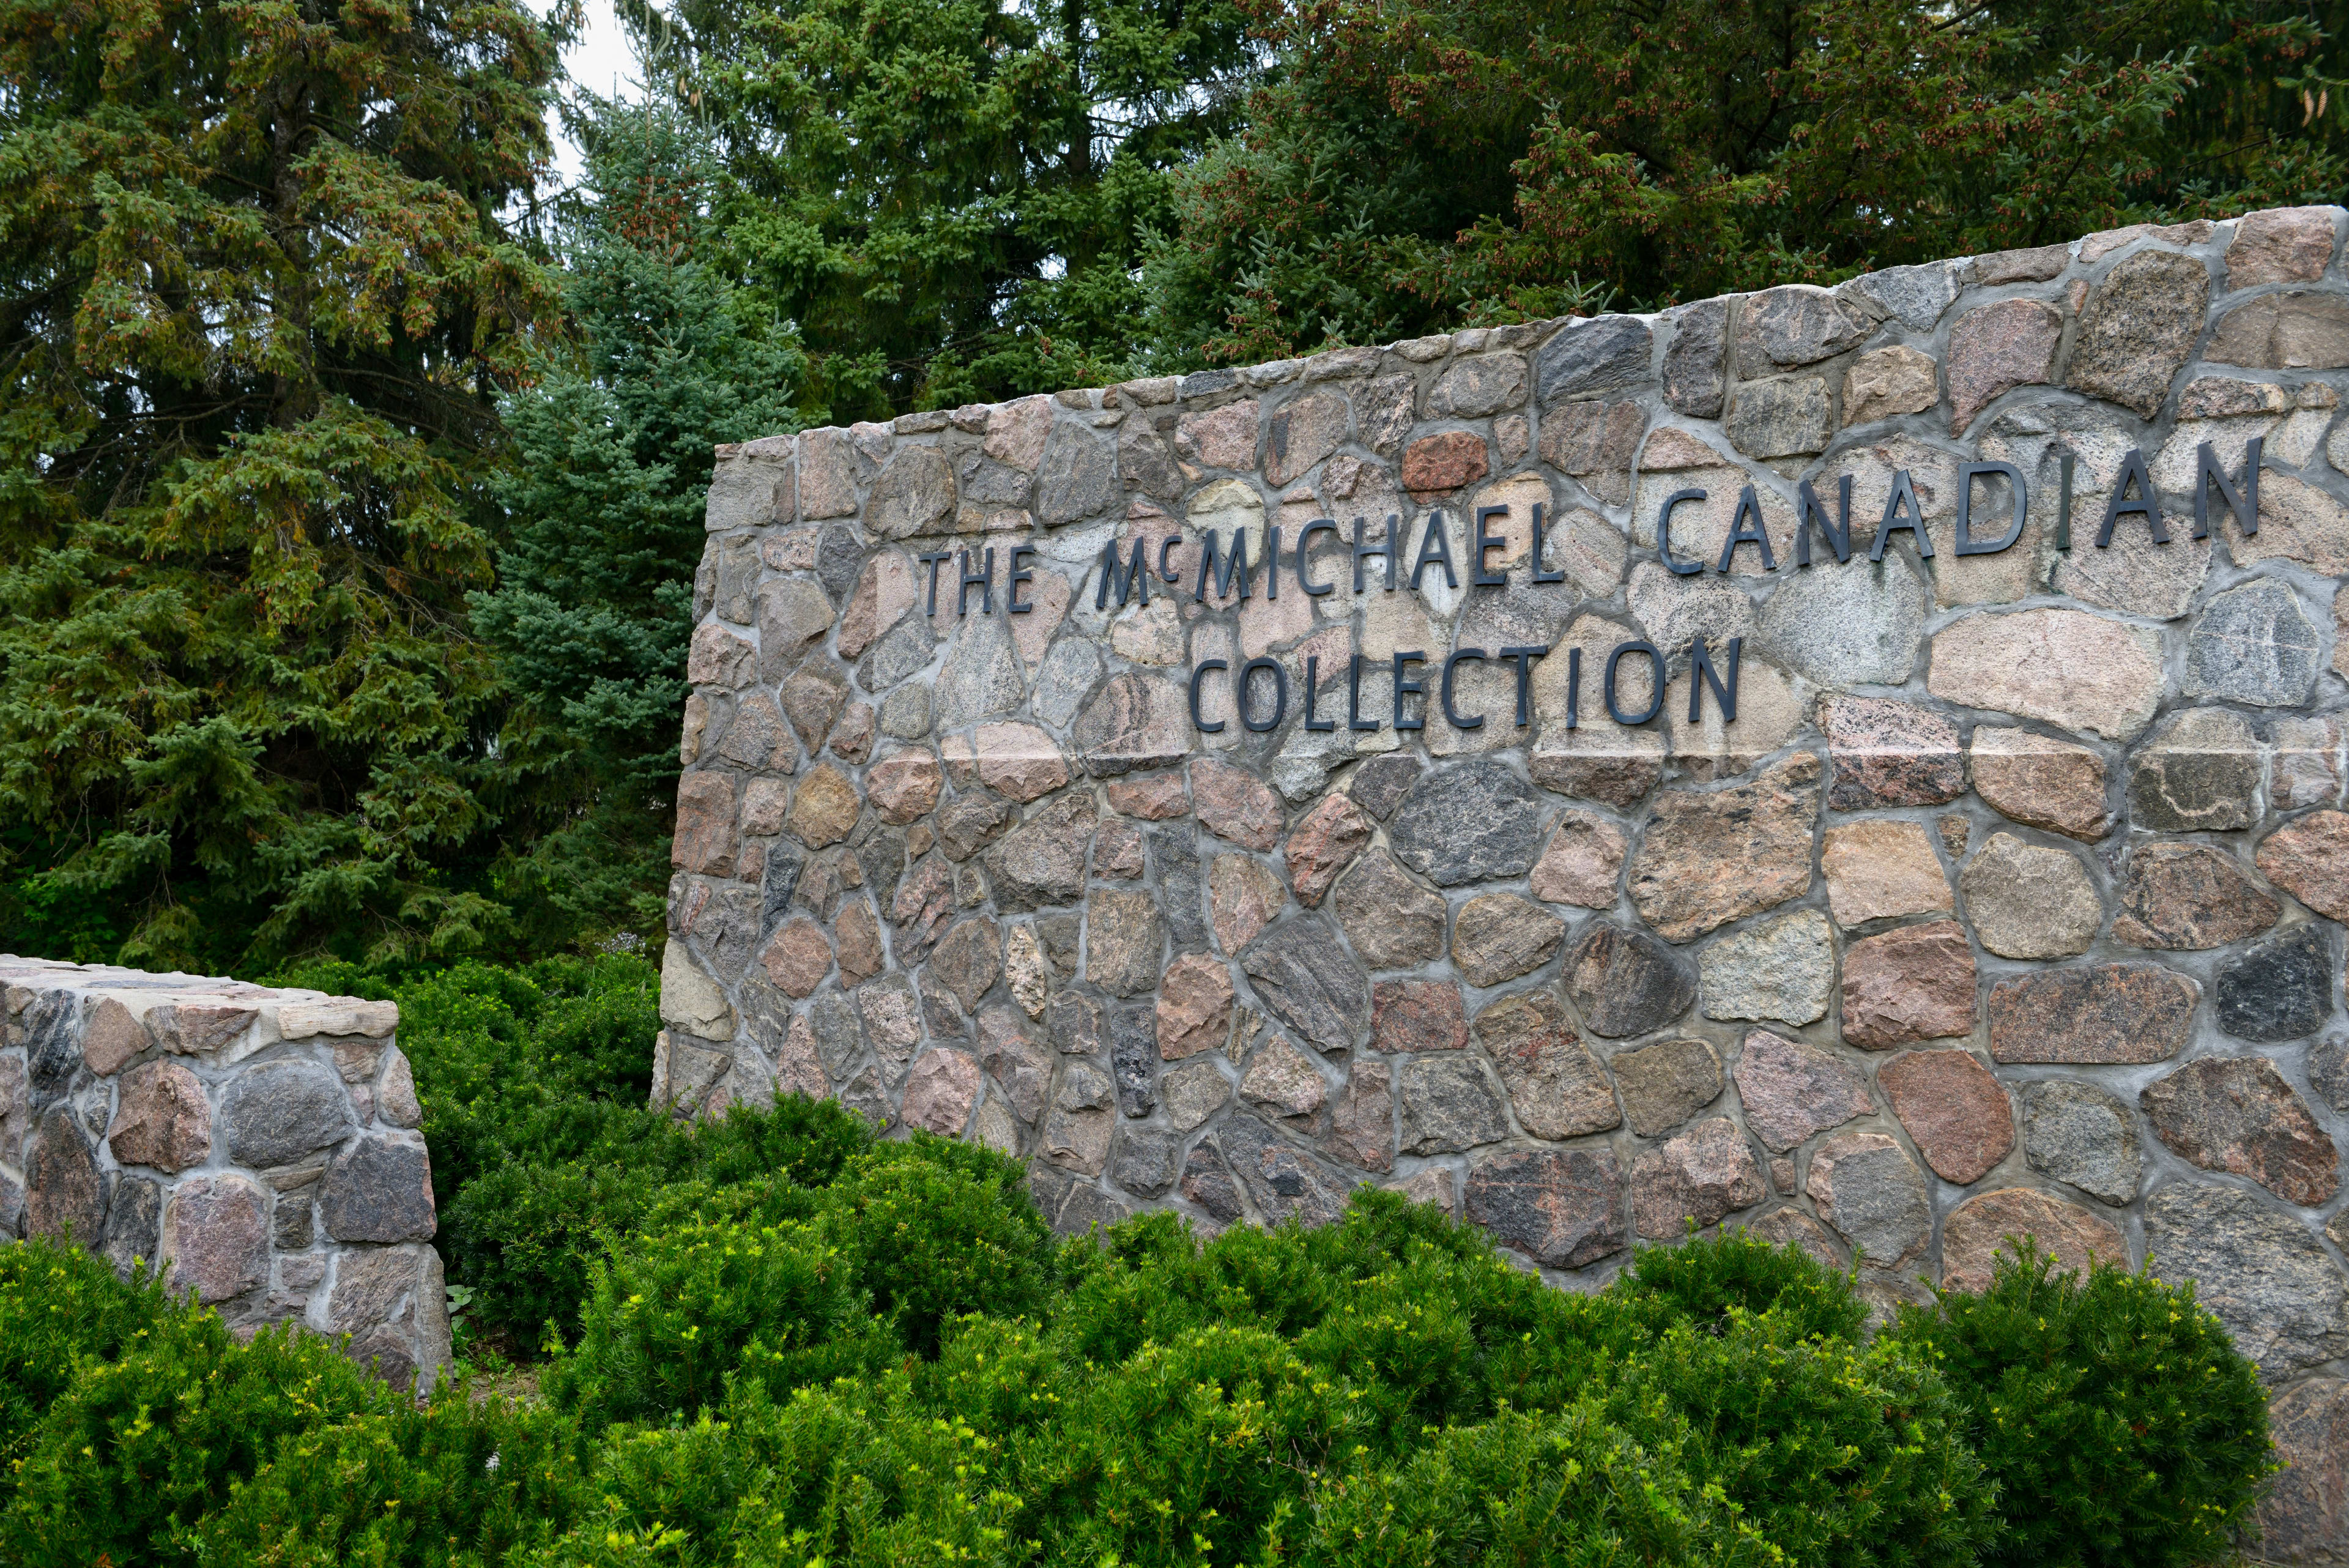 McMichael Canadian Collection sign outside surrounded by trees